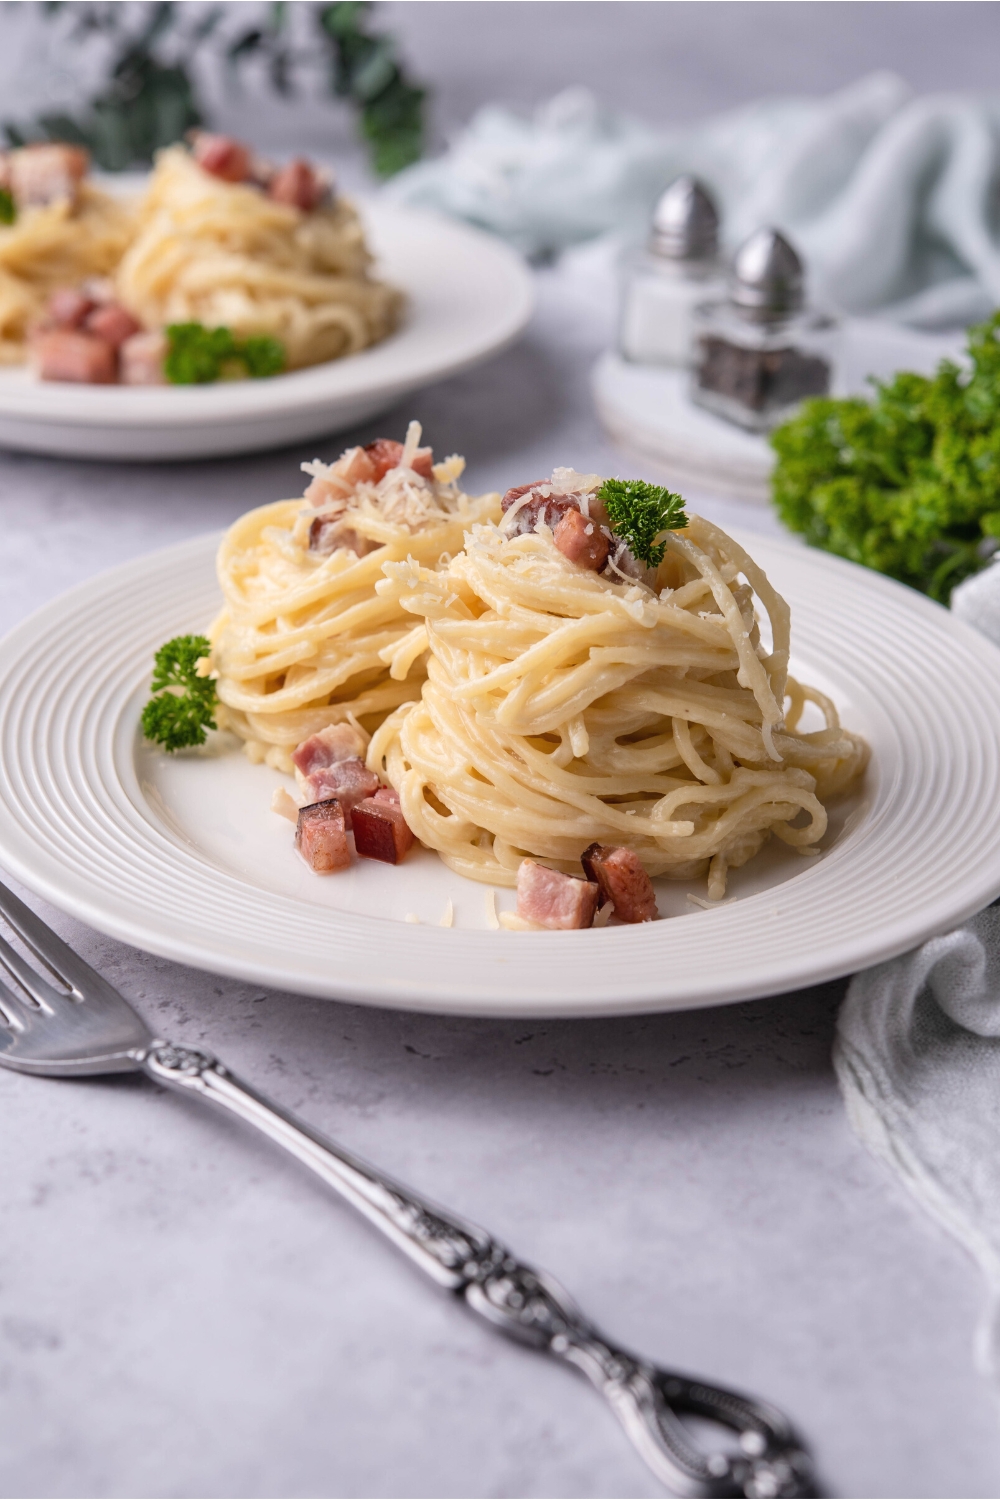 Two stacks of spaghetti noodles with diced pancetta and Parmesan cheese on them on a white plate.